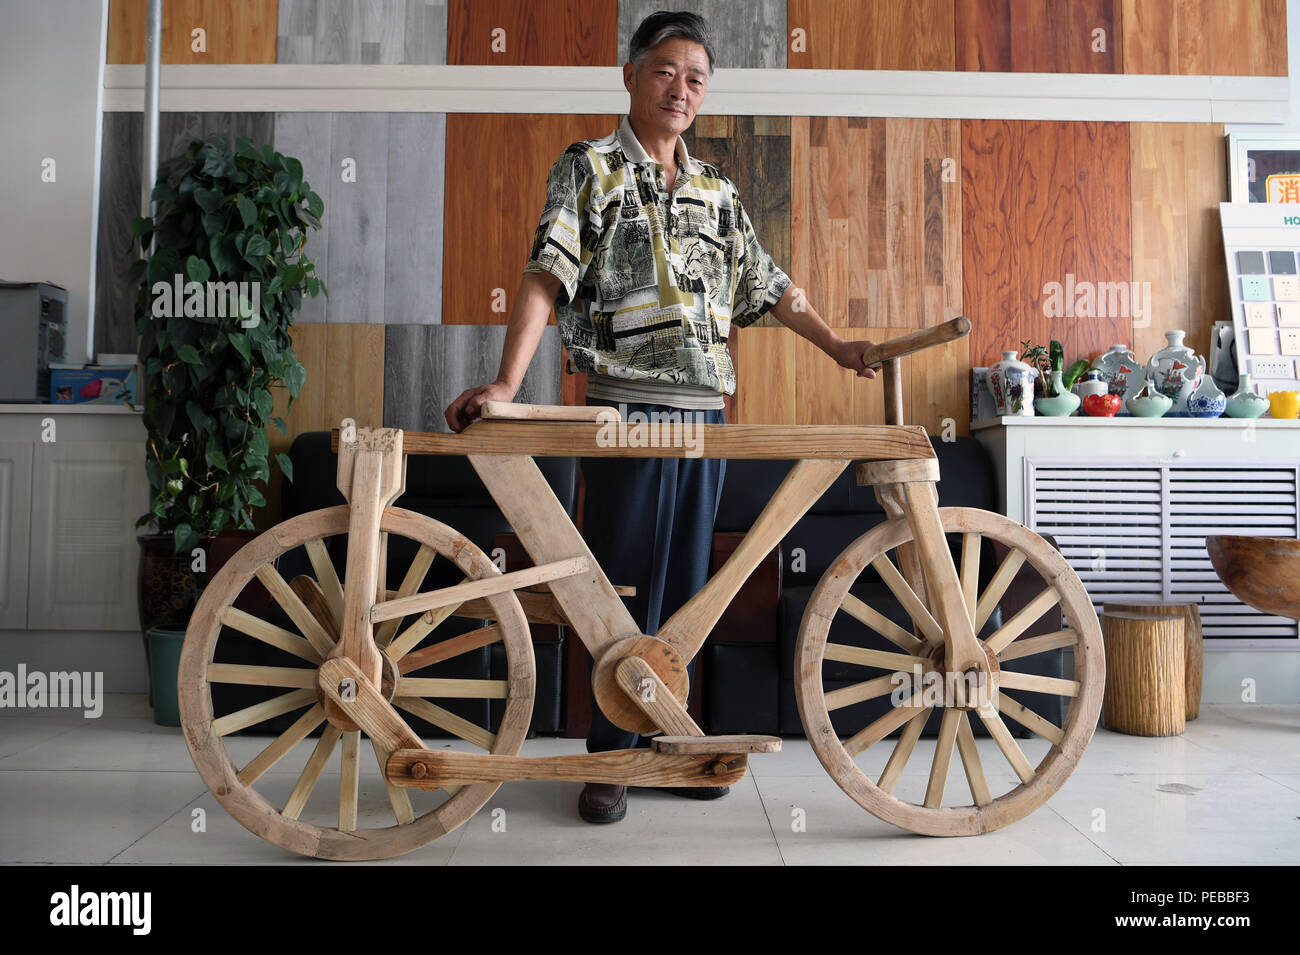 Pingliang, China's Gansu Province. 14th Aug, 2018. He Yong shows his wooden bicycle in Liuhu Township of Pingliang City, northwest China's Gansu Province, Aug. 14, 2018. The 55-year-old farmer He Yong successfully made a 1.8-meter-long and 0.98-meter-high wooden bicycle in 2017. The bike was made purely of wood, including walnut and elm. Credit: Fan Peishen/Xinhua/Alamy Live News Stock Photo